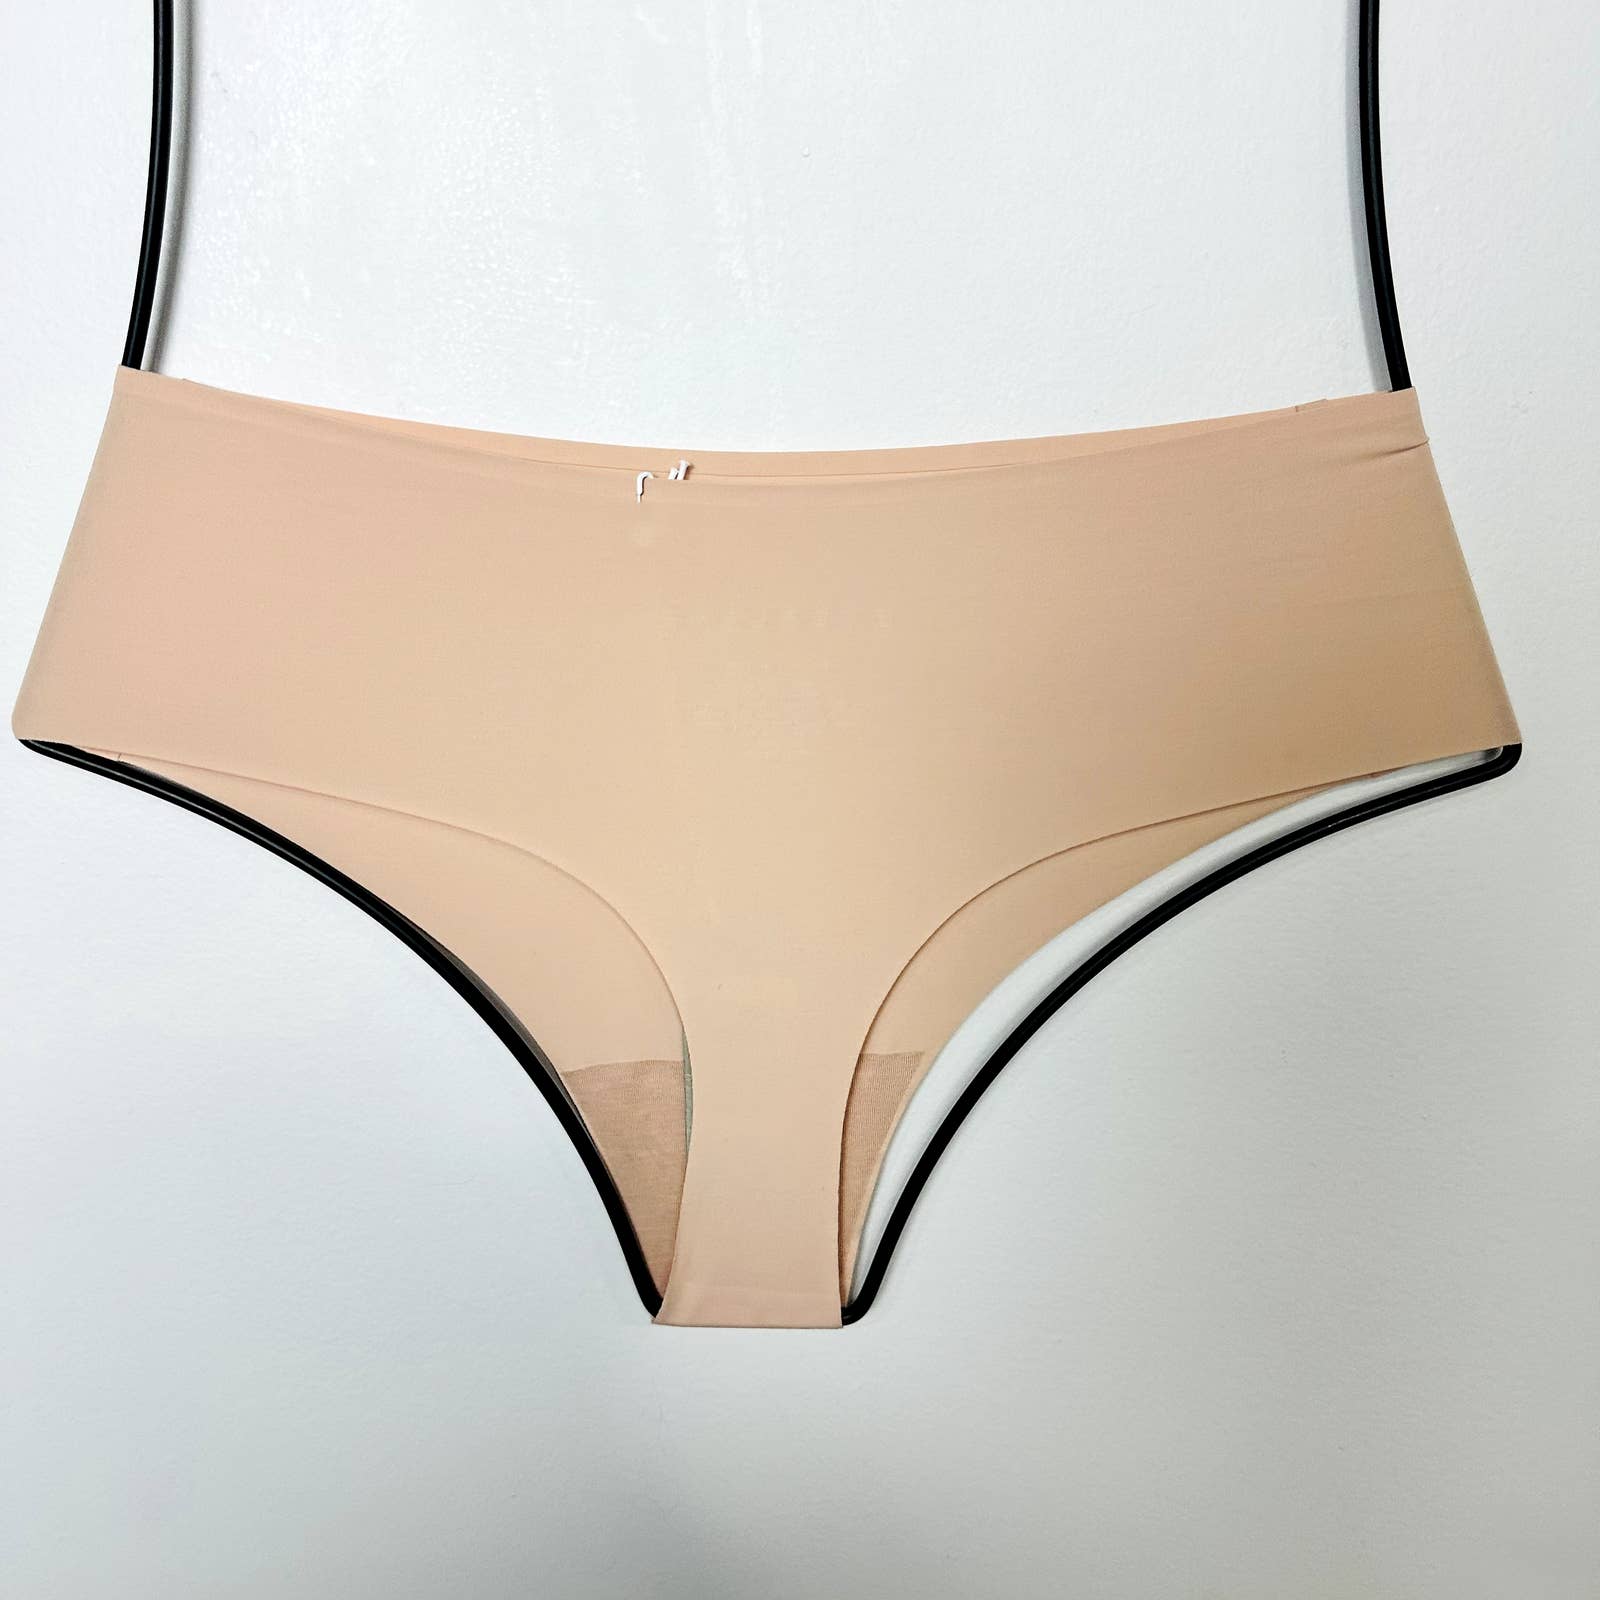 Everlane NWT The ReNew Seamless Stretch Low Rise Thong Panty Light Tan Sz Small